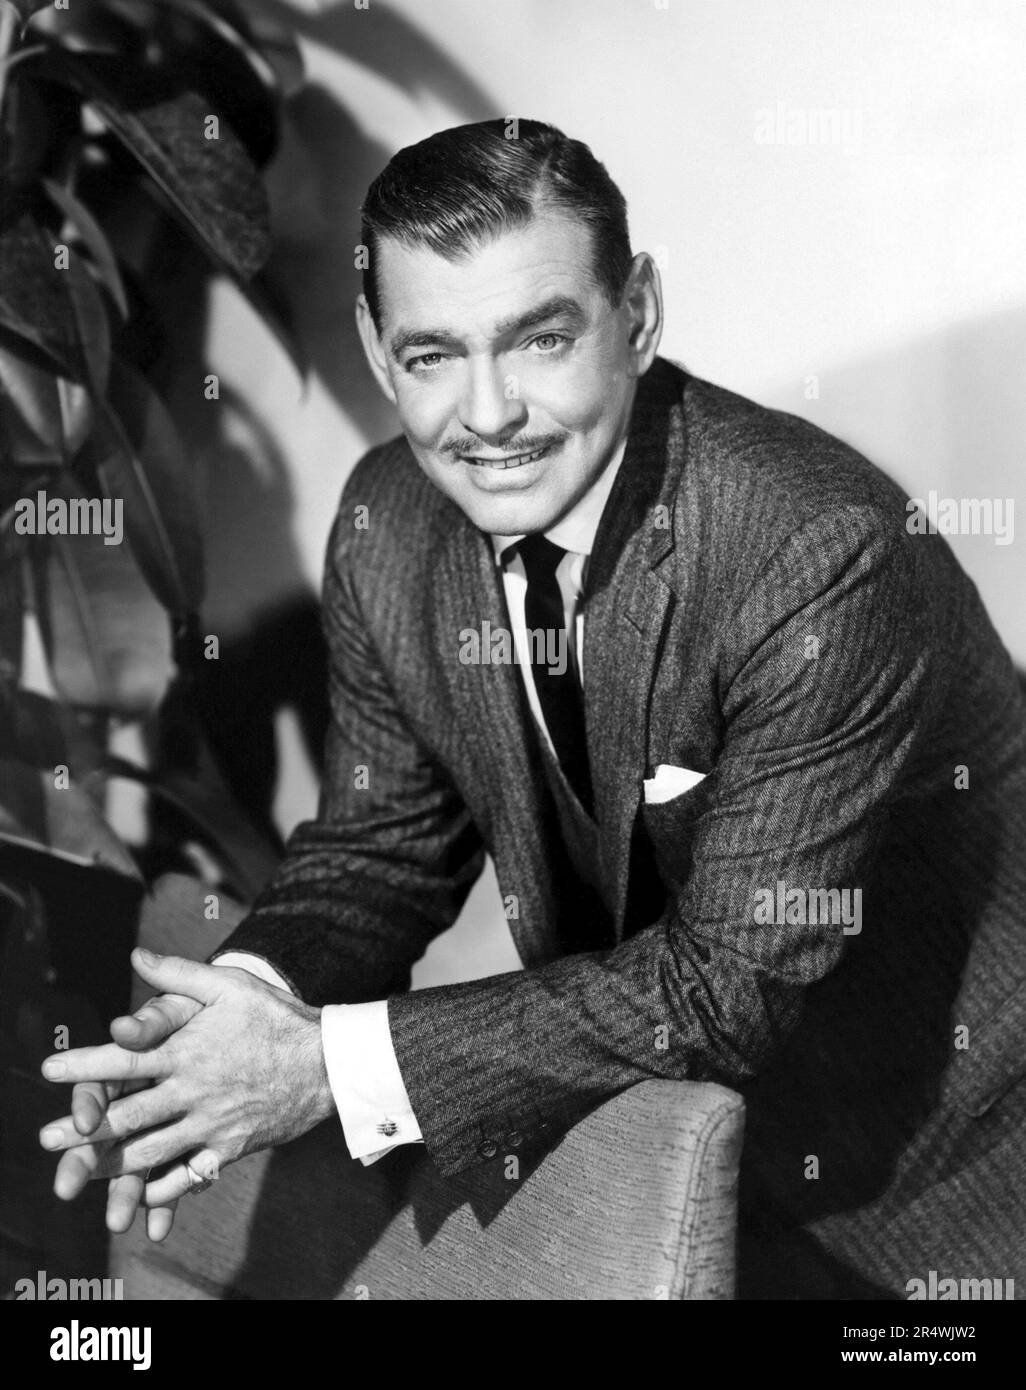 Photograph of Clark Gable (1901-1960) American film actor. Dated 1950 Stock Photo